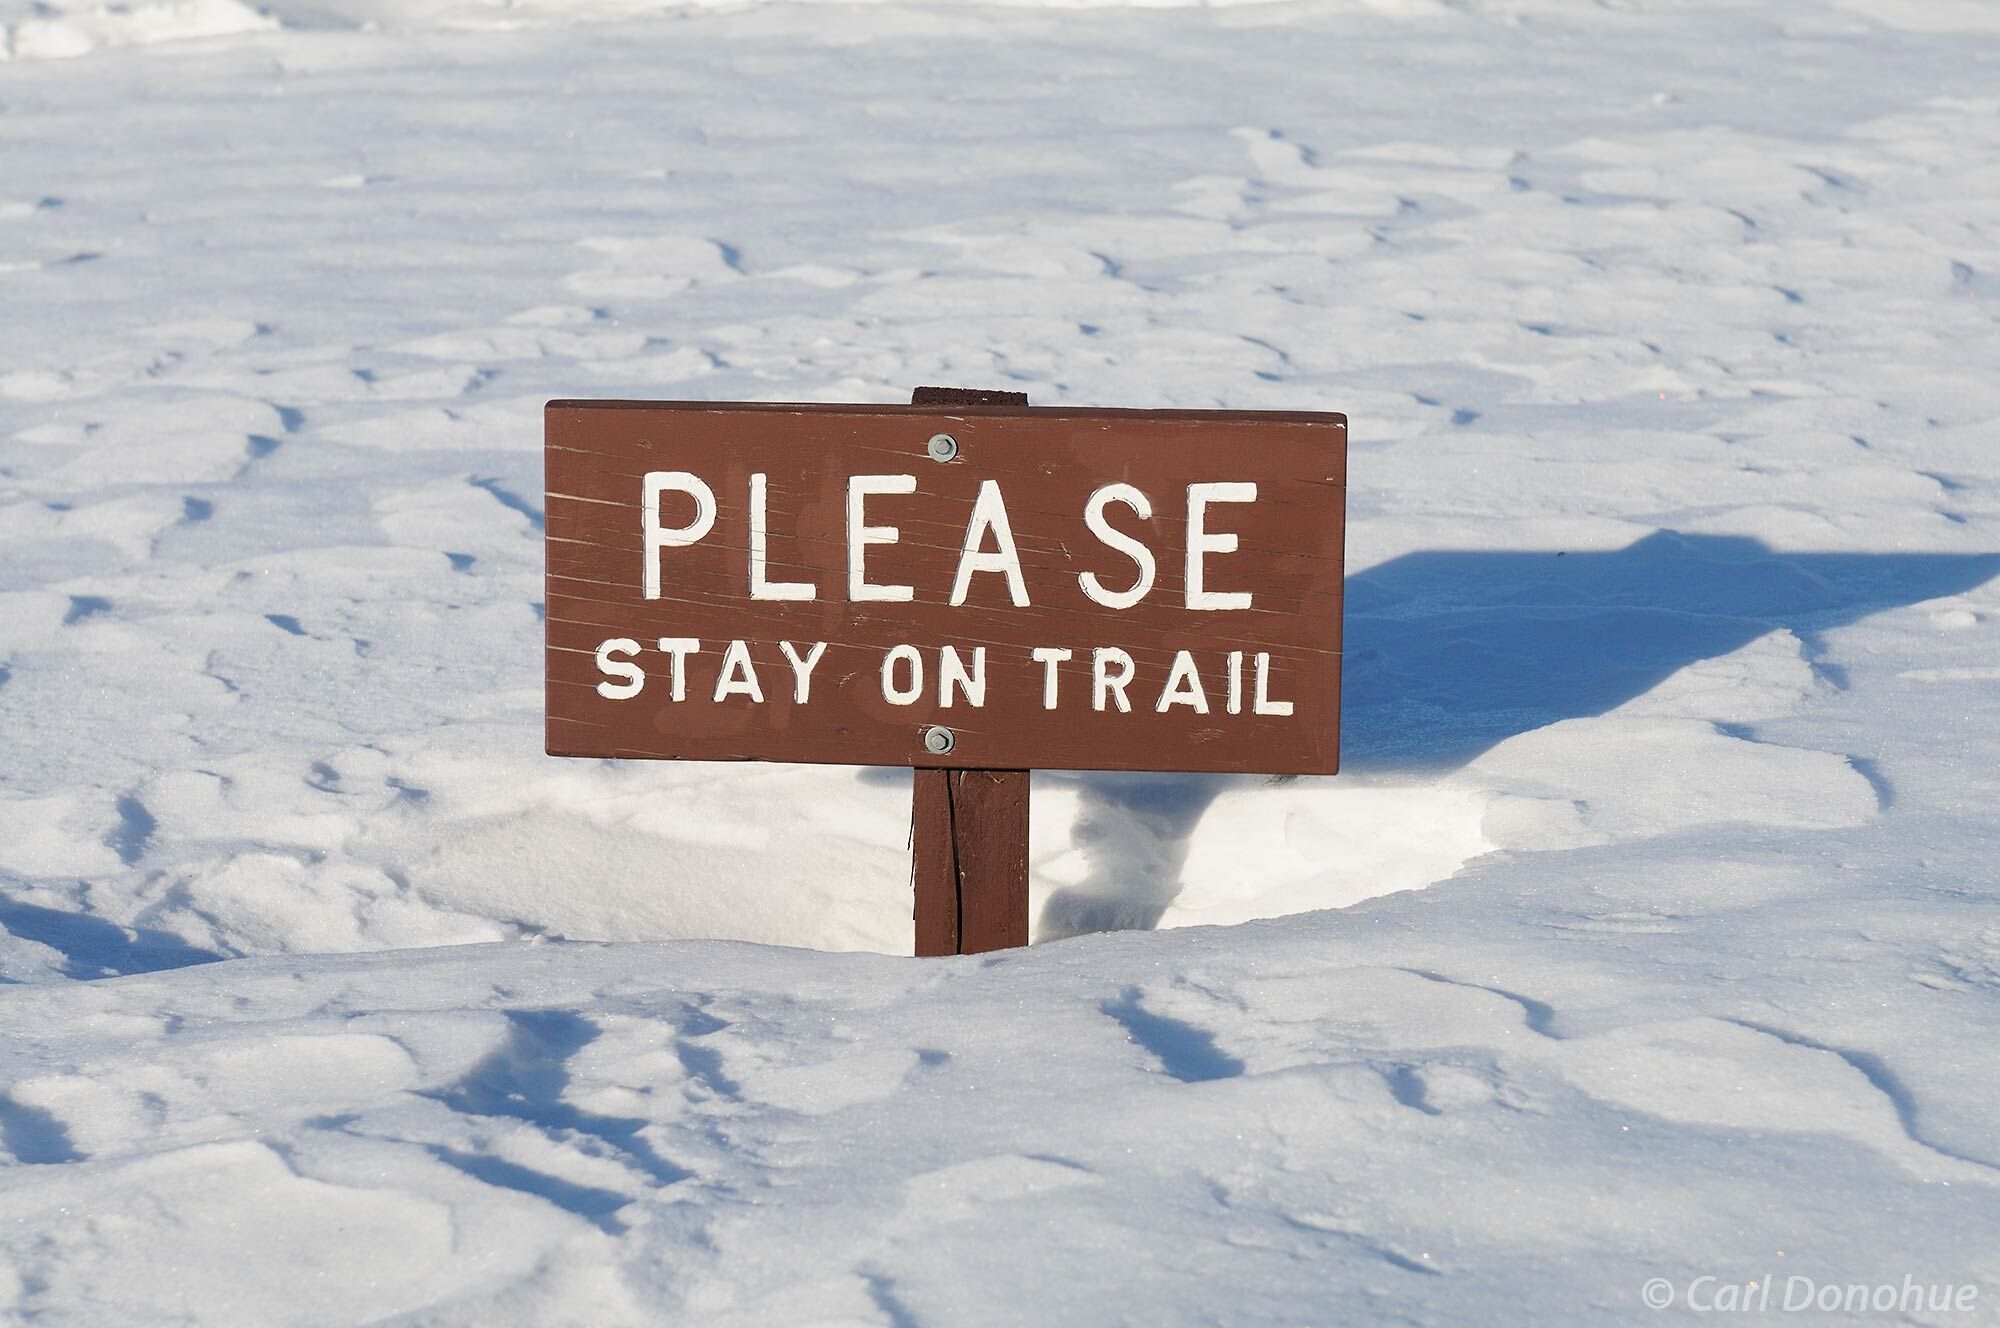 A sign in Alaska's Denali State Park requests visitors to stay only on trails - hardly necessary with 4' of snow on the ground...